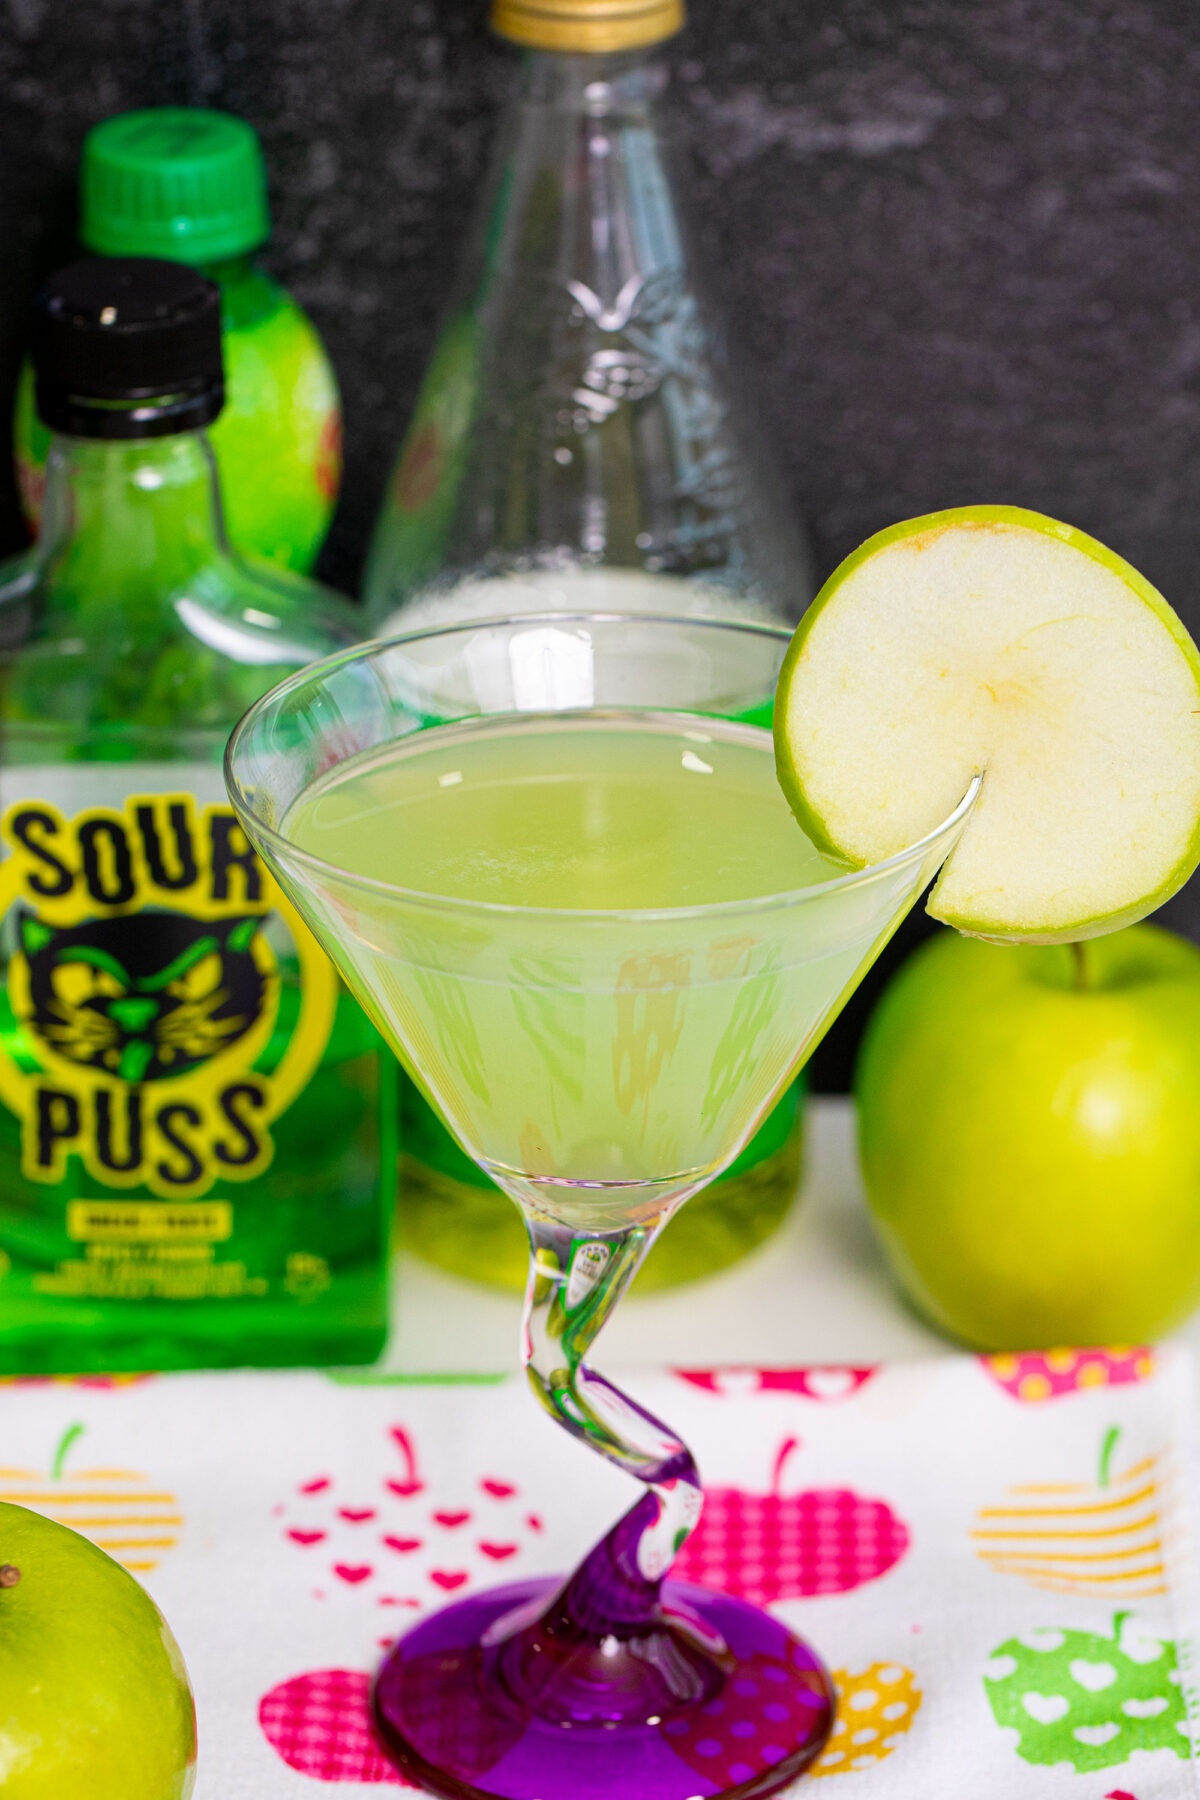 An Appletini close-up in a martini glass with green apple slice.